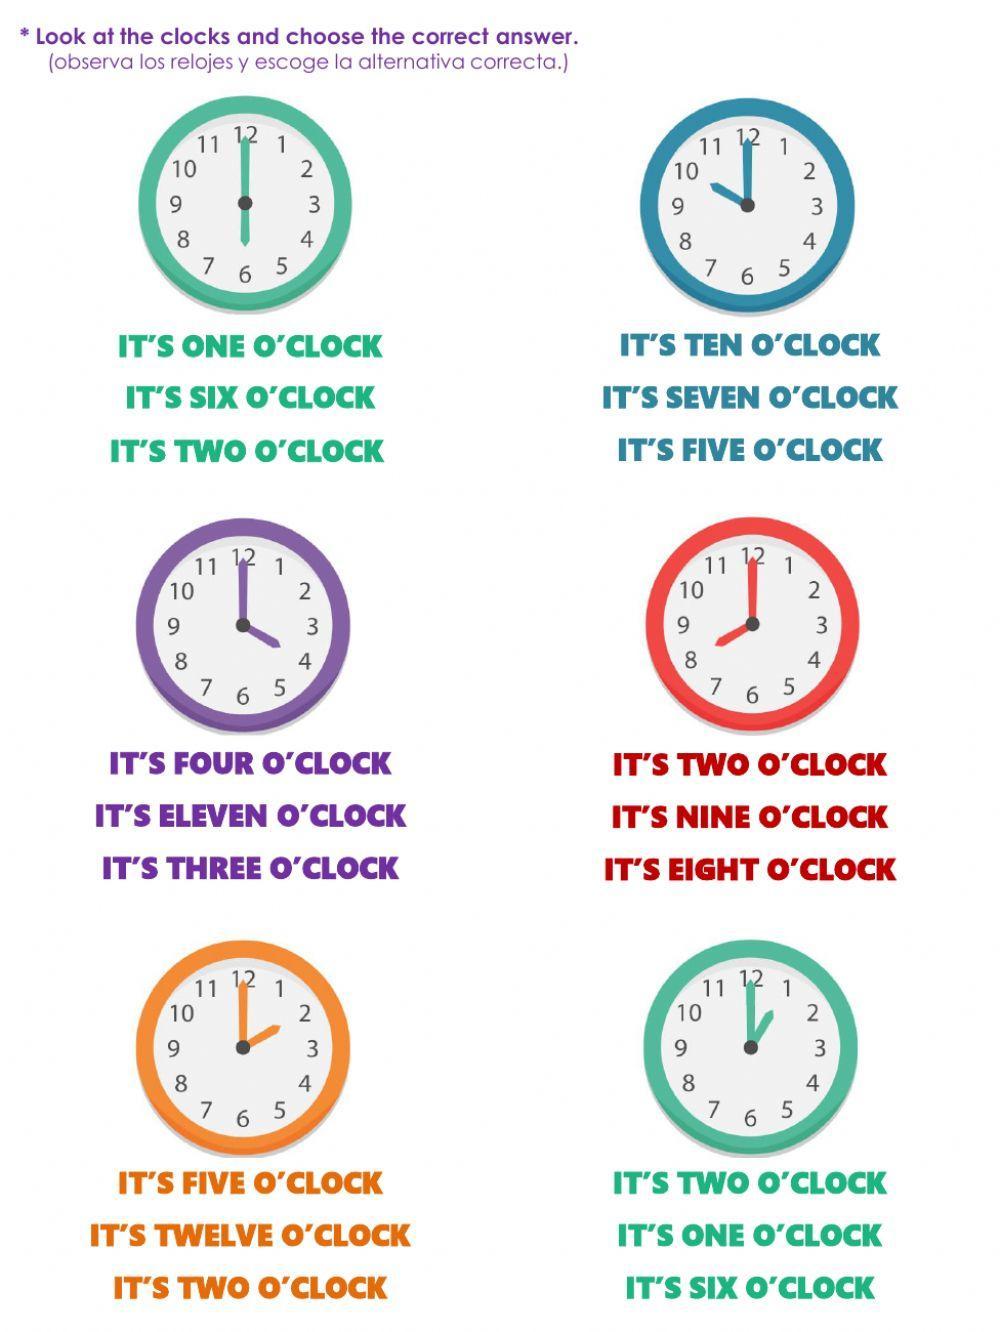 What time is it? (o'clock)